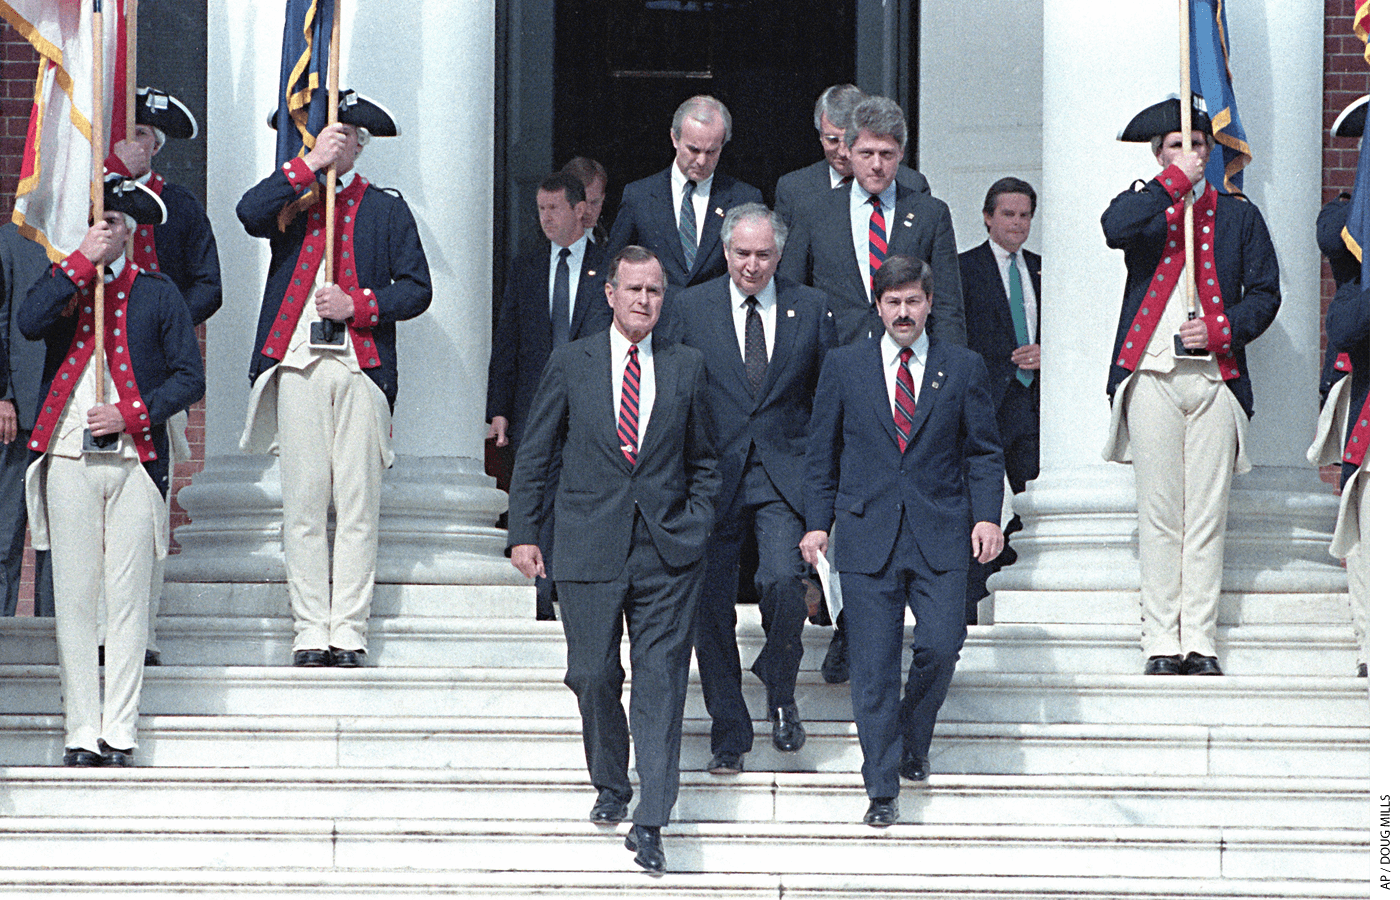 Forty-nine of 50 governors, including then-Arkansas-governor Bill Clinton, attended President George H.W. Bush’s “education summit” in Charlottesville, Virginia, in 1989